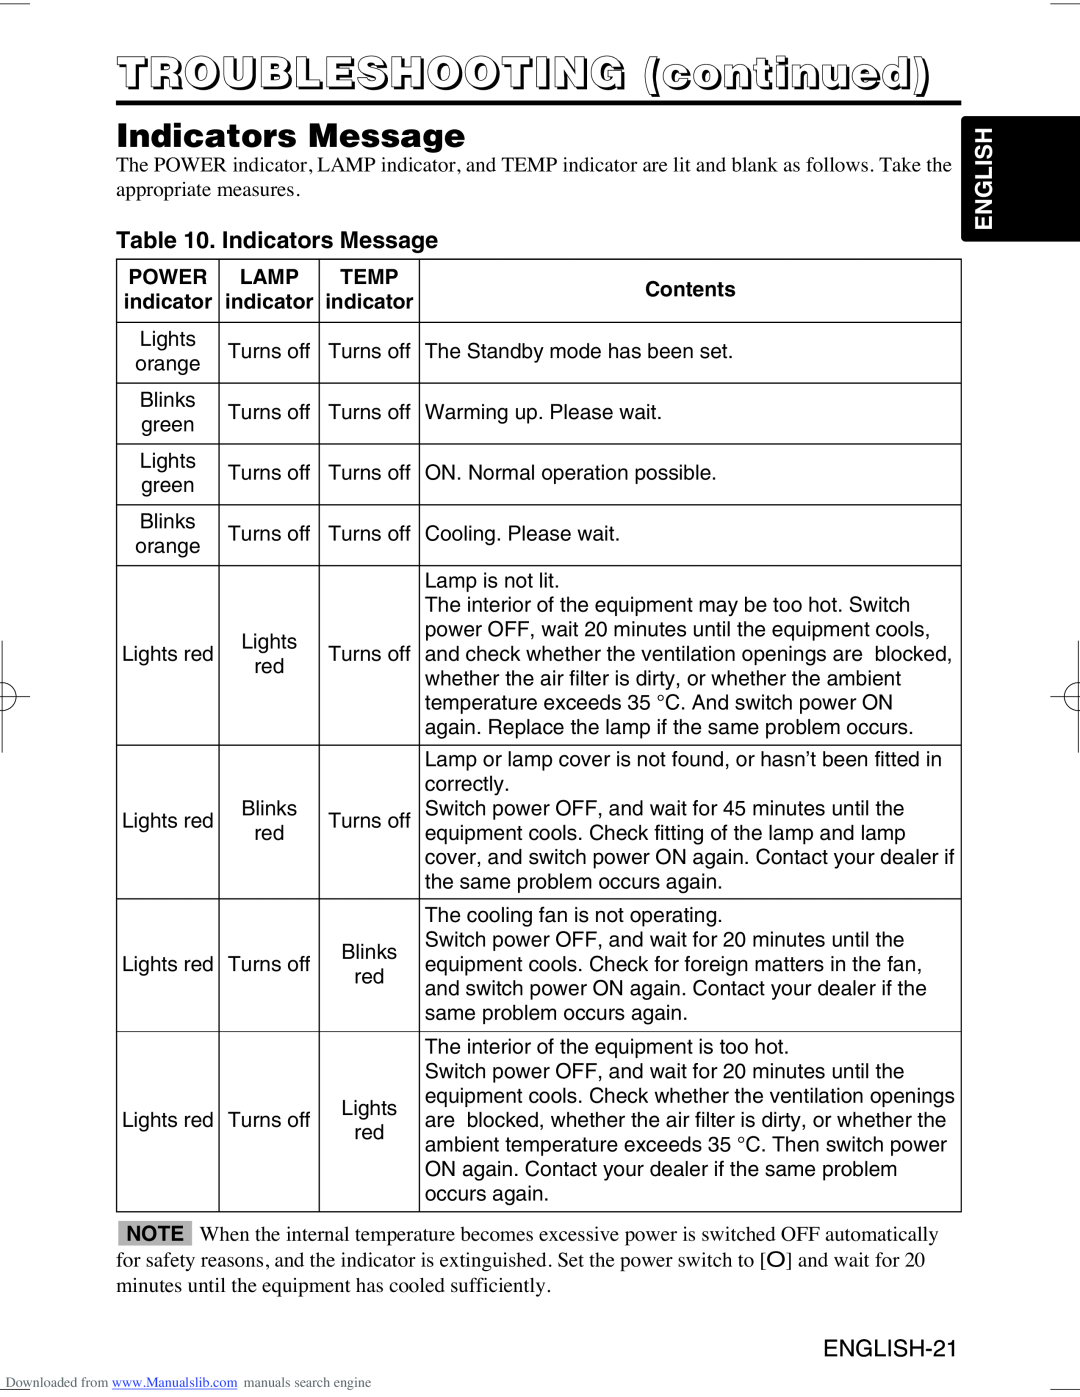 Hitachi CP-X995W user manual TROUBLESHOOTING continued, Indicators Message, English 